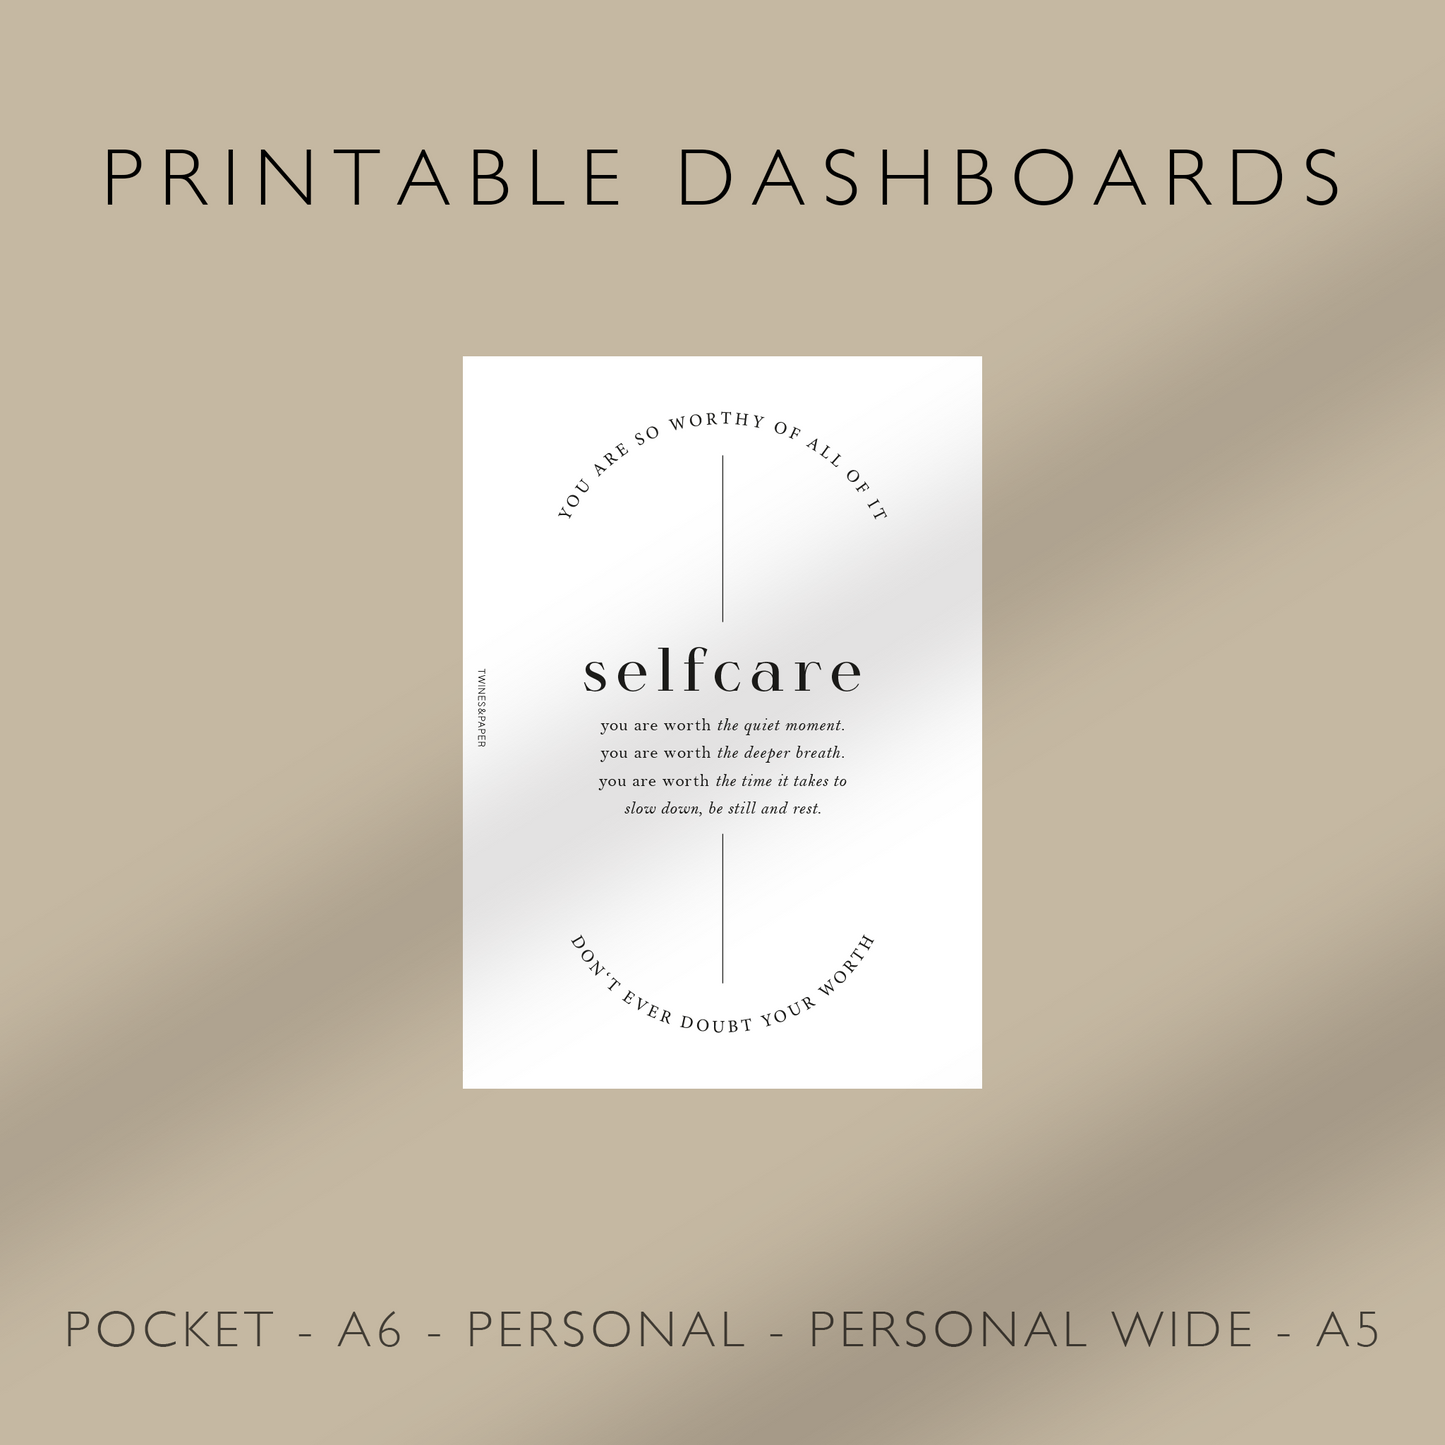 "Selfcare - you are so worthy of all of it" Printable Planner Dashboards Pocket, A6, Personal, Personal Wide, A5